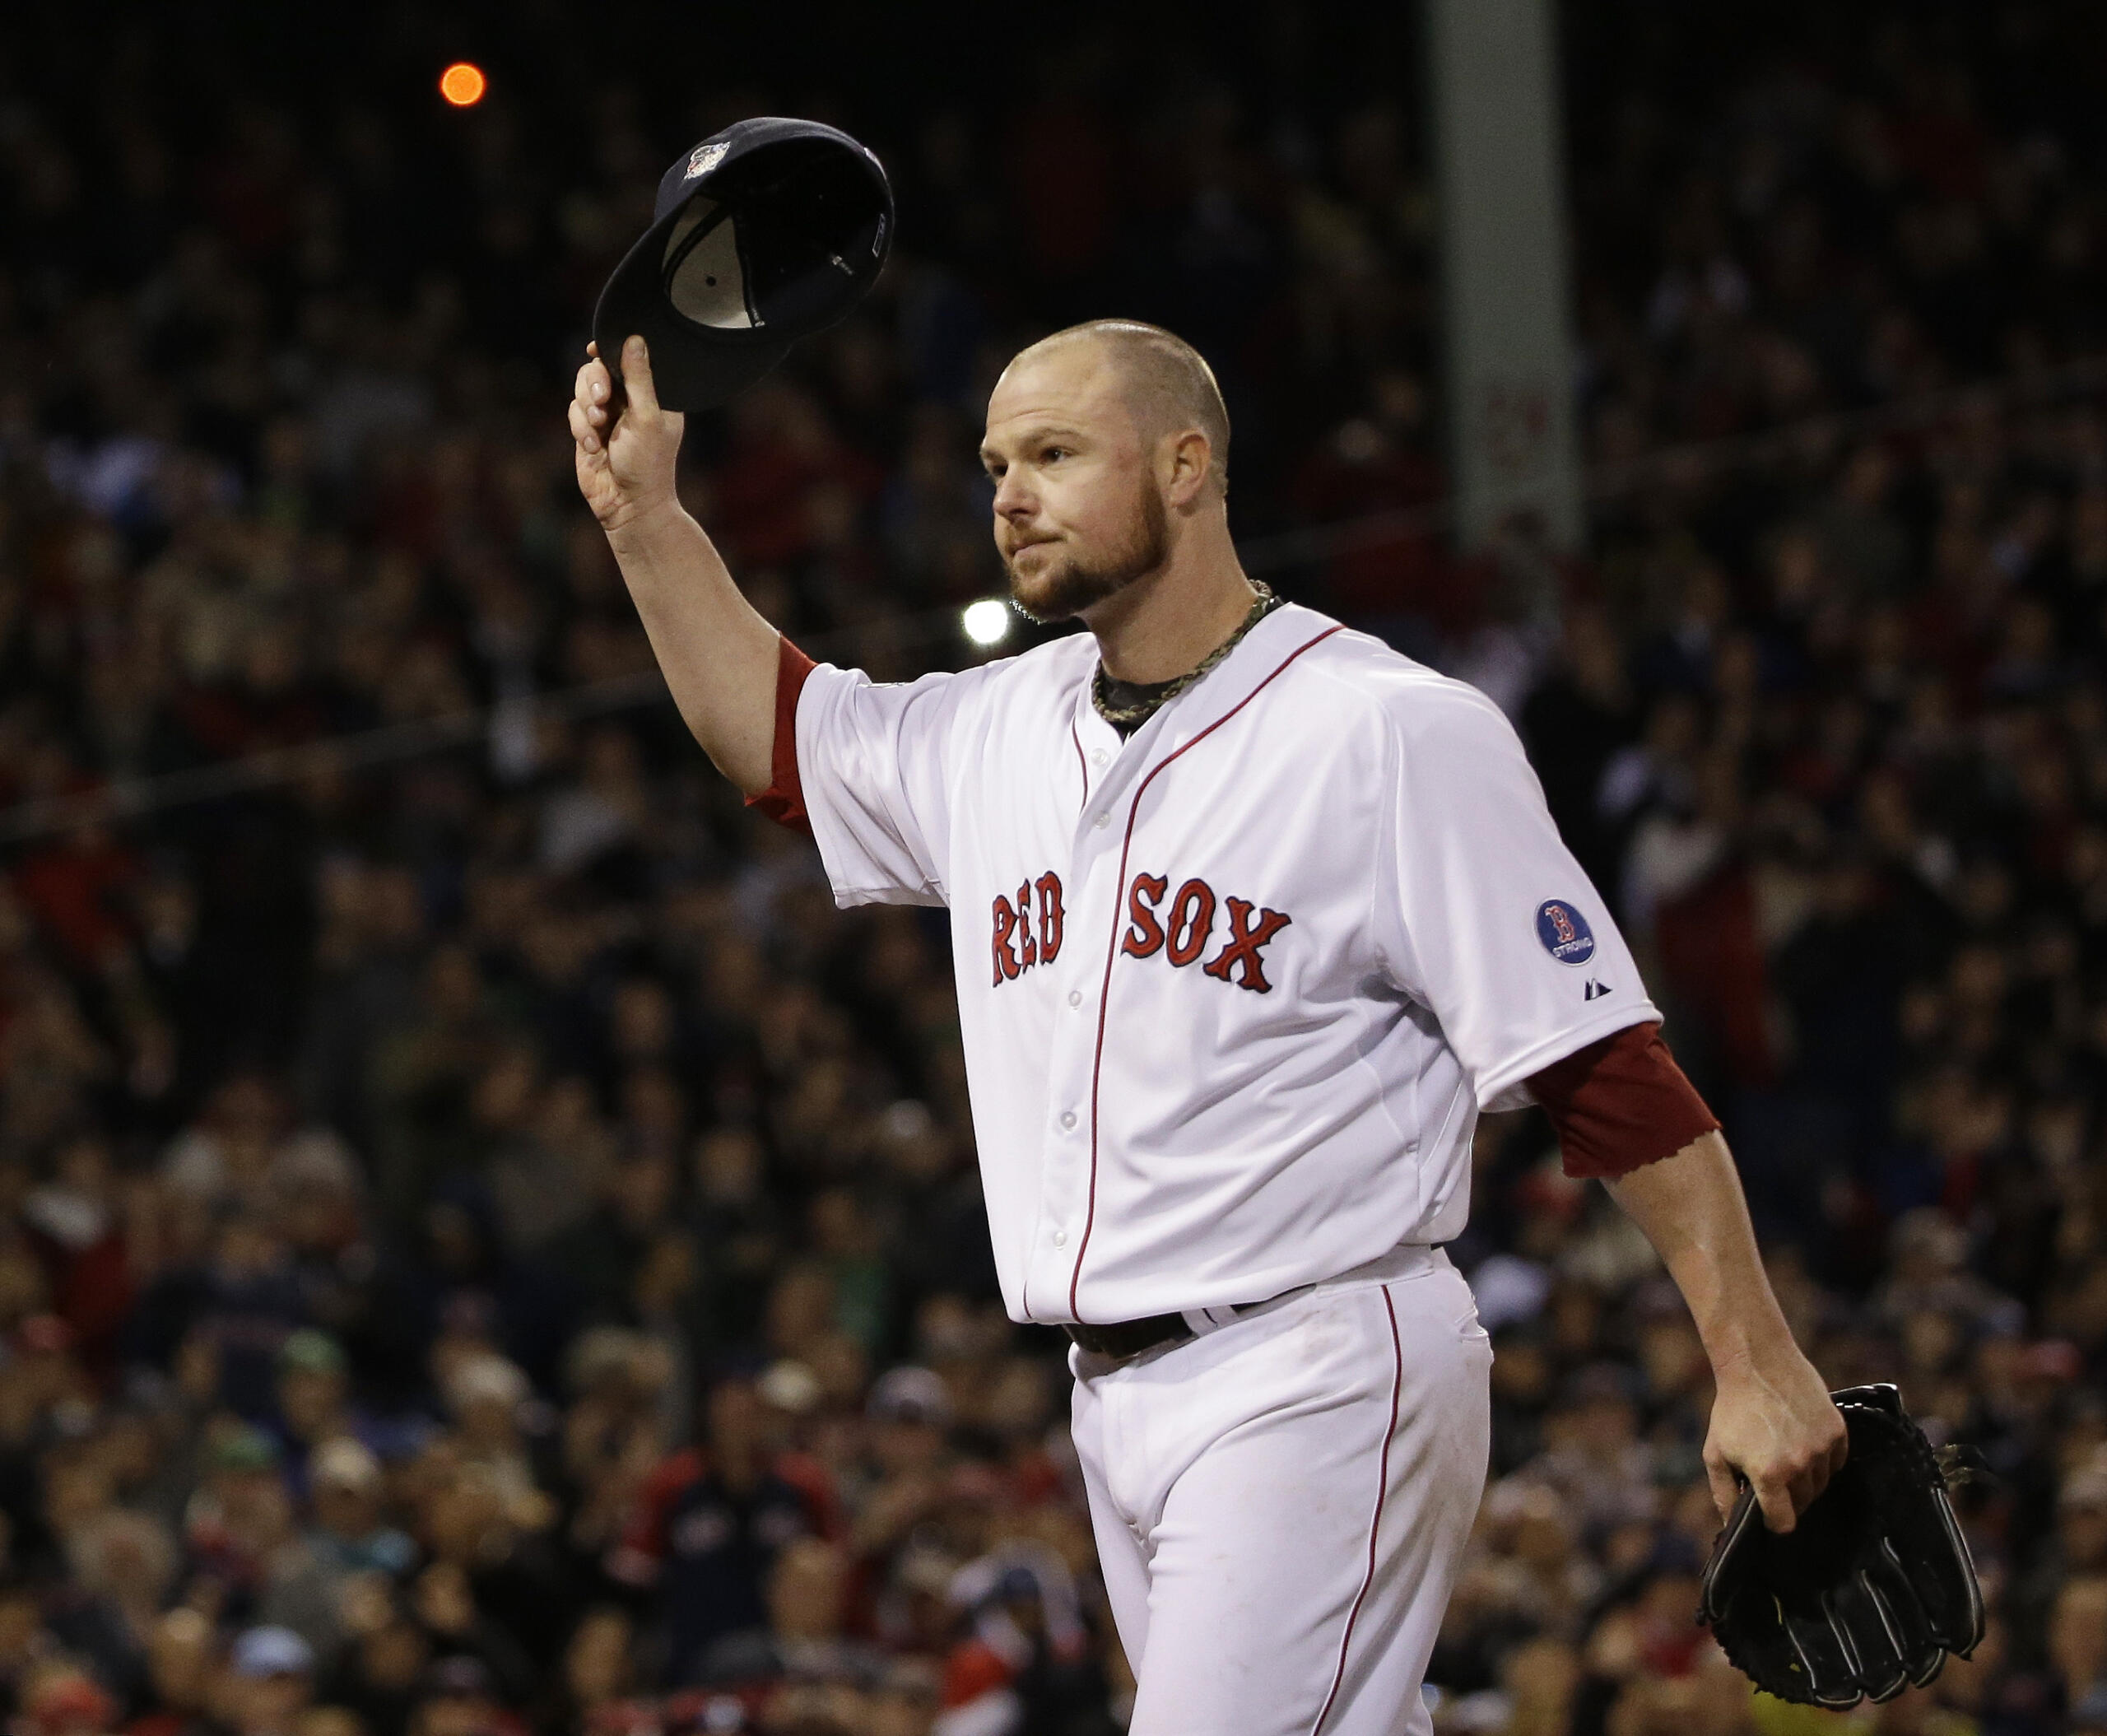 Tacoma native and former Cubs, Red Sox pitcher Lester announces retirement  - The Columbian